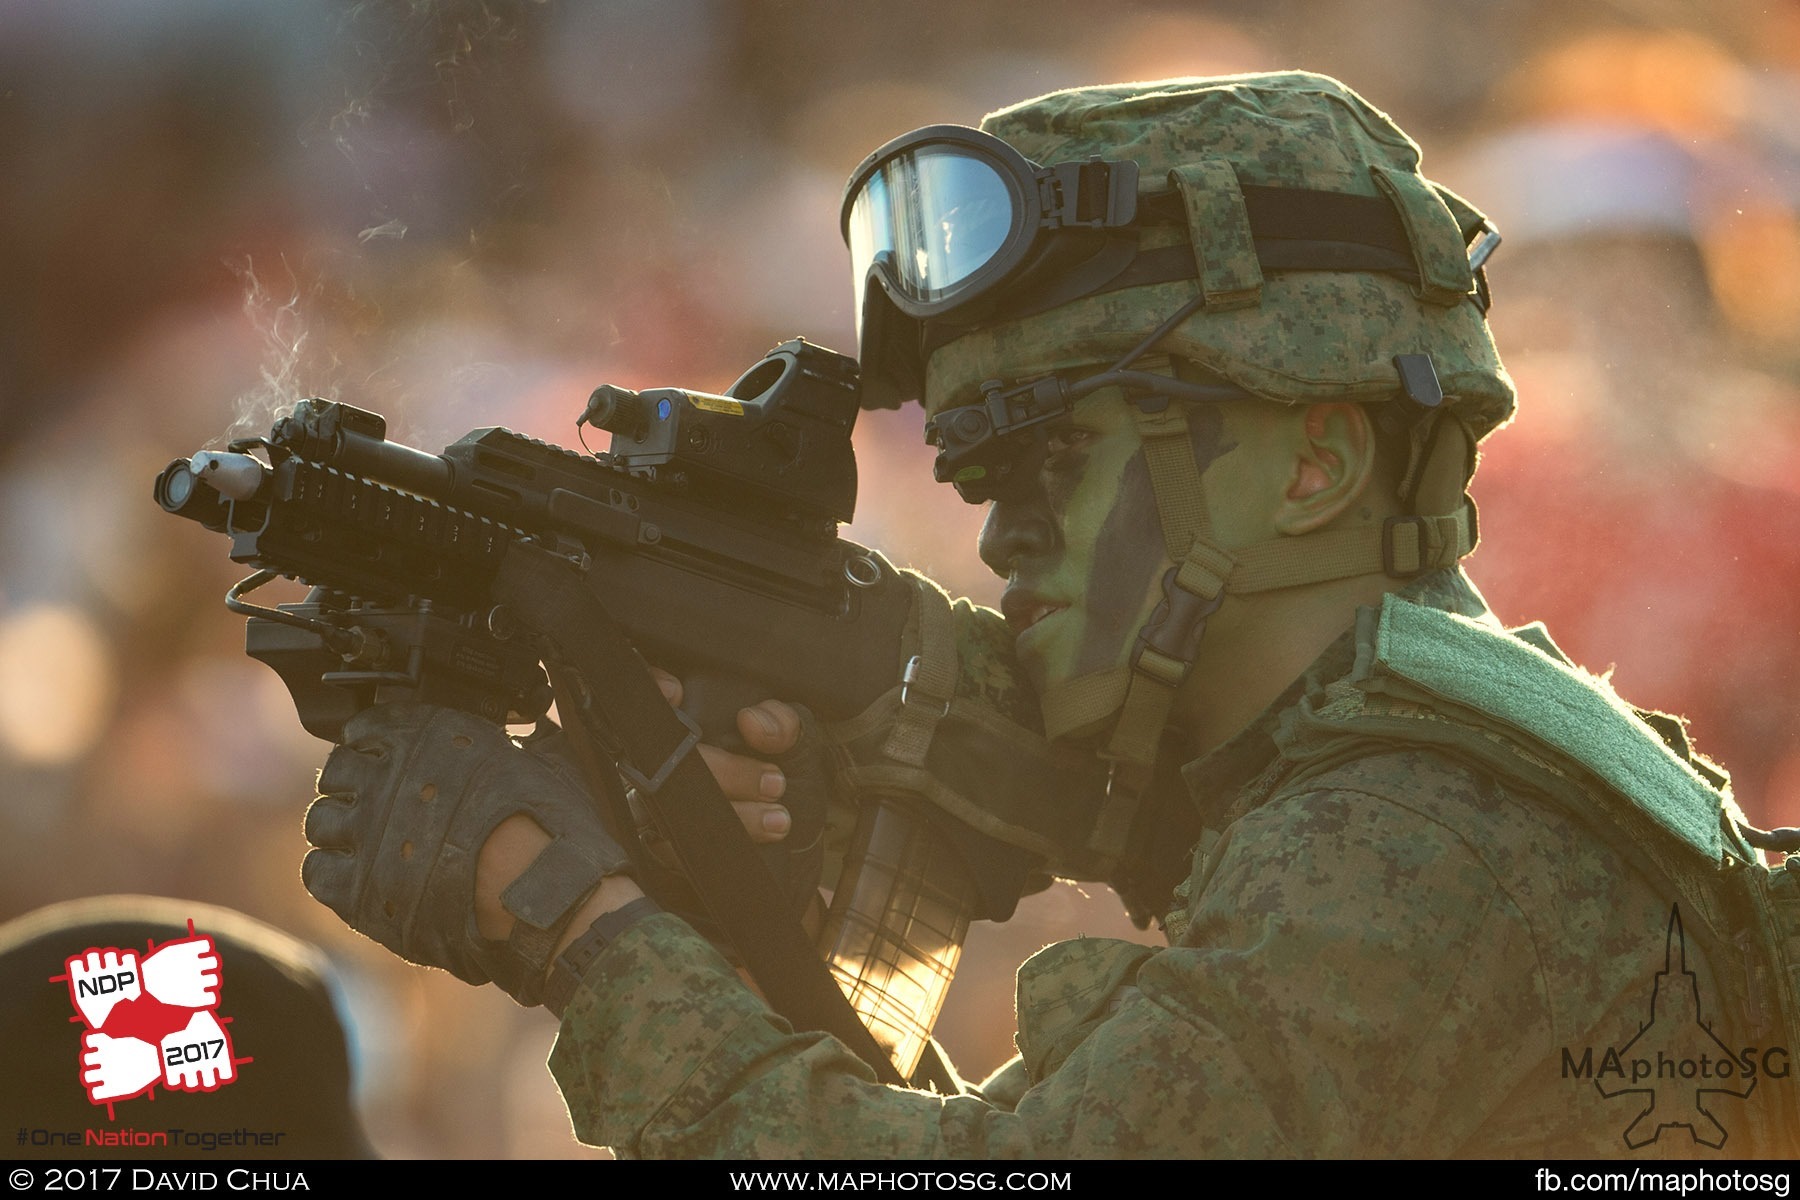 16. Infantryman from the Singapore Armed Forces in action within the spectator stands.